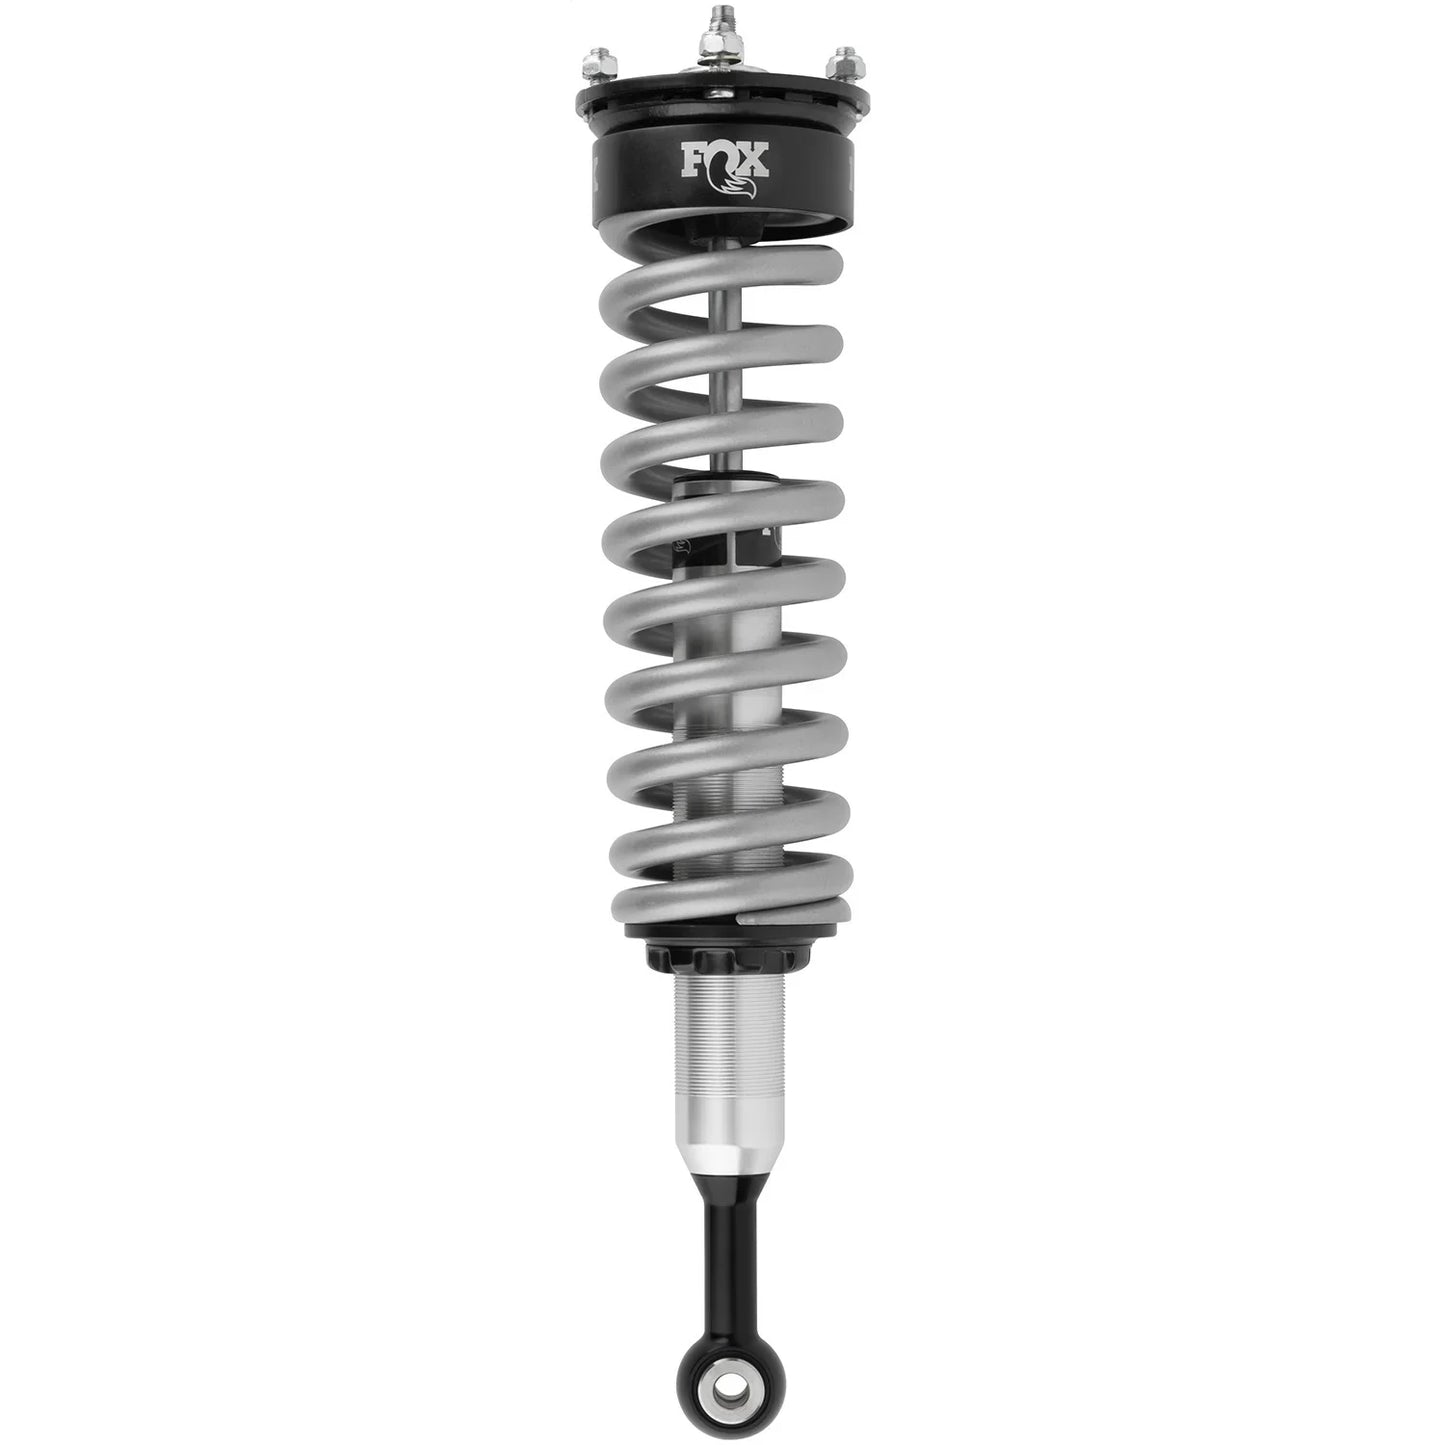 FOX PERFORMANCE SERIES 2.0 SHOCK: TOYOTA 4RUNNER 96-02/ TACOMA 96-04 (0-2" FRONT LIFT)